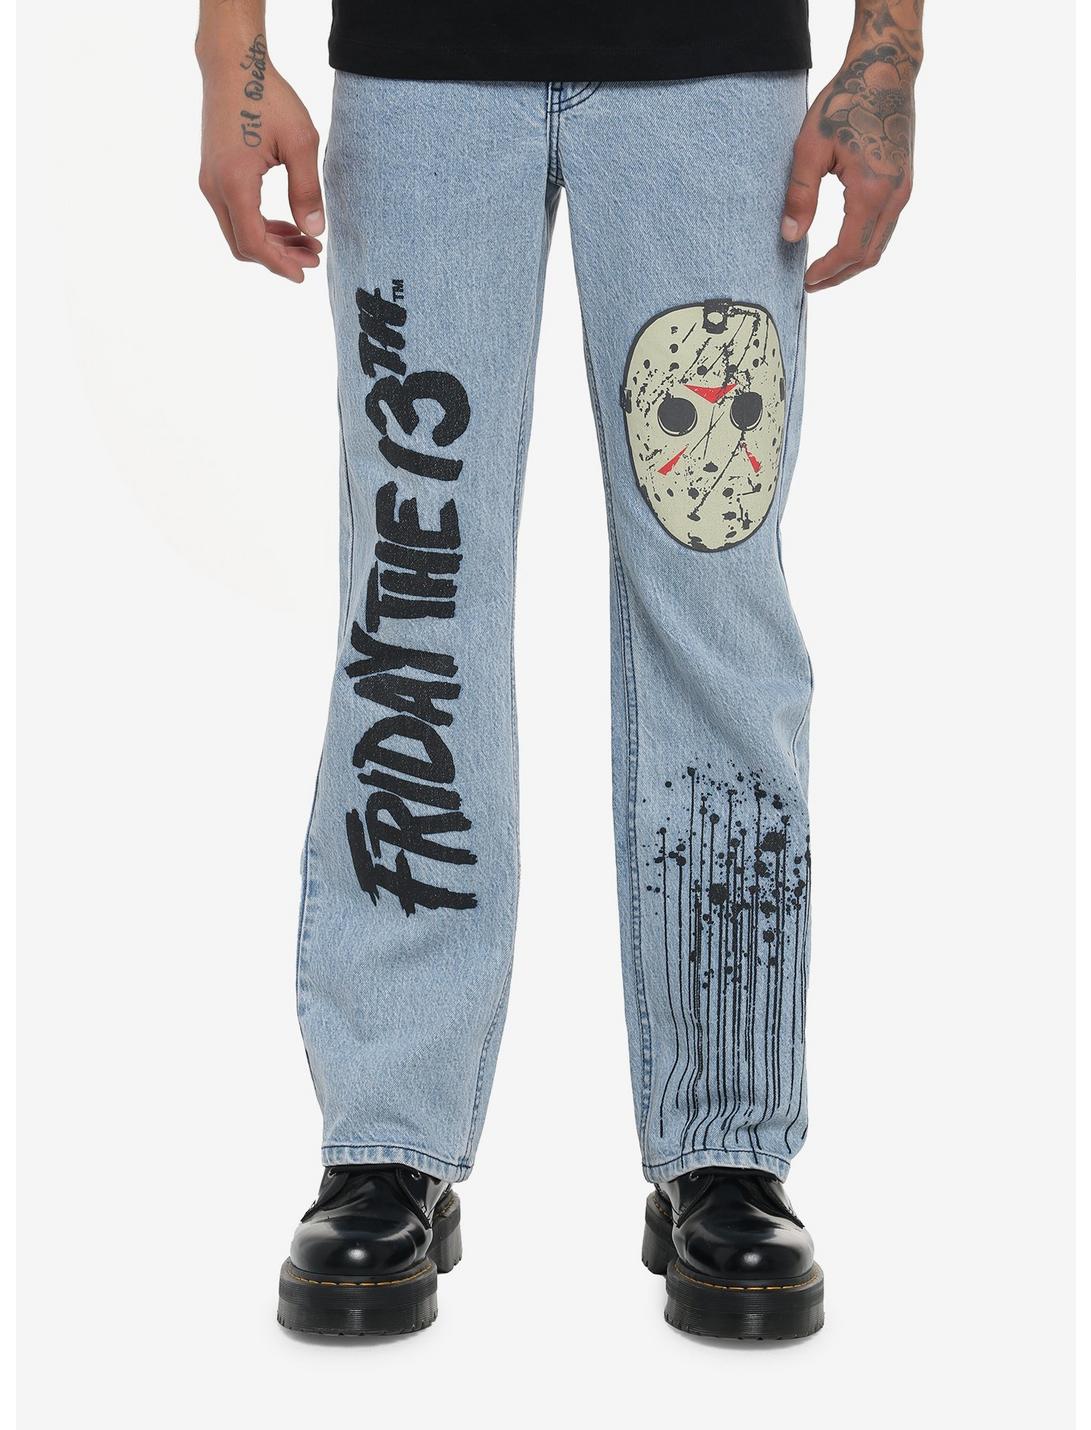 Friday The 13th Jason Voorhees Mask Straight Leg Jeans, MULTI, hi-res